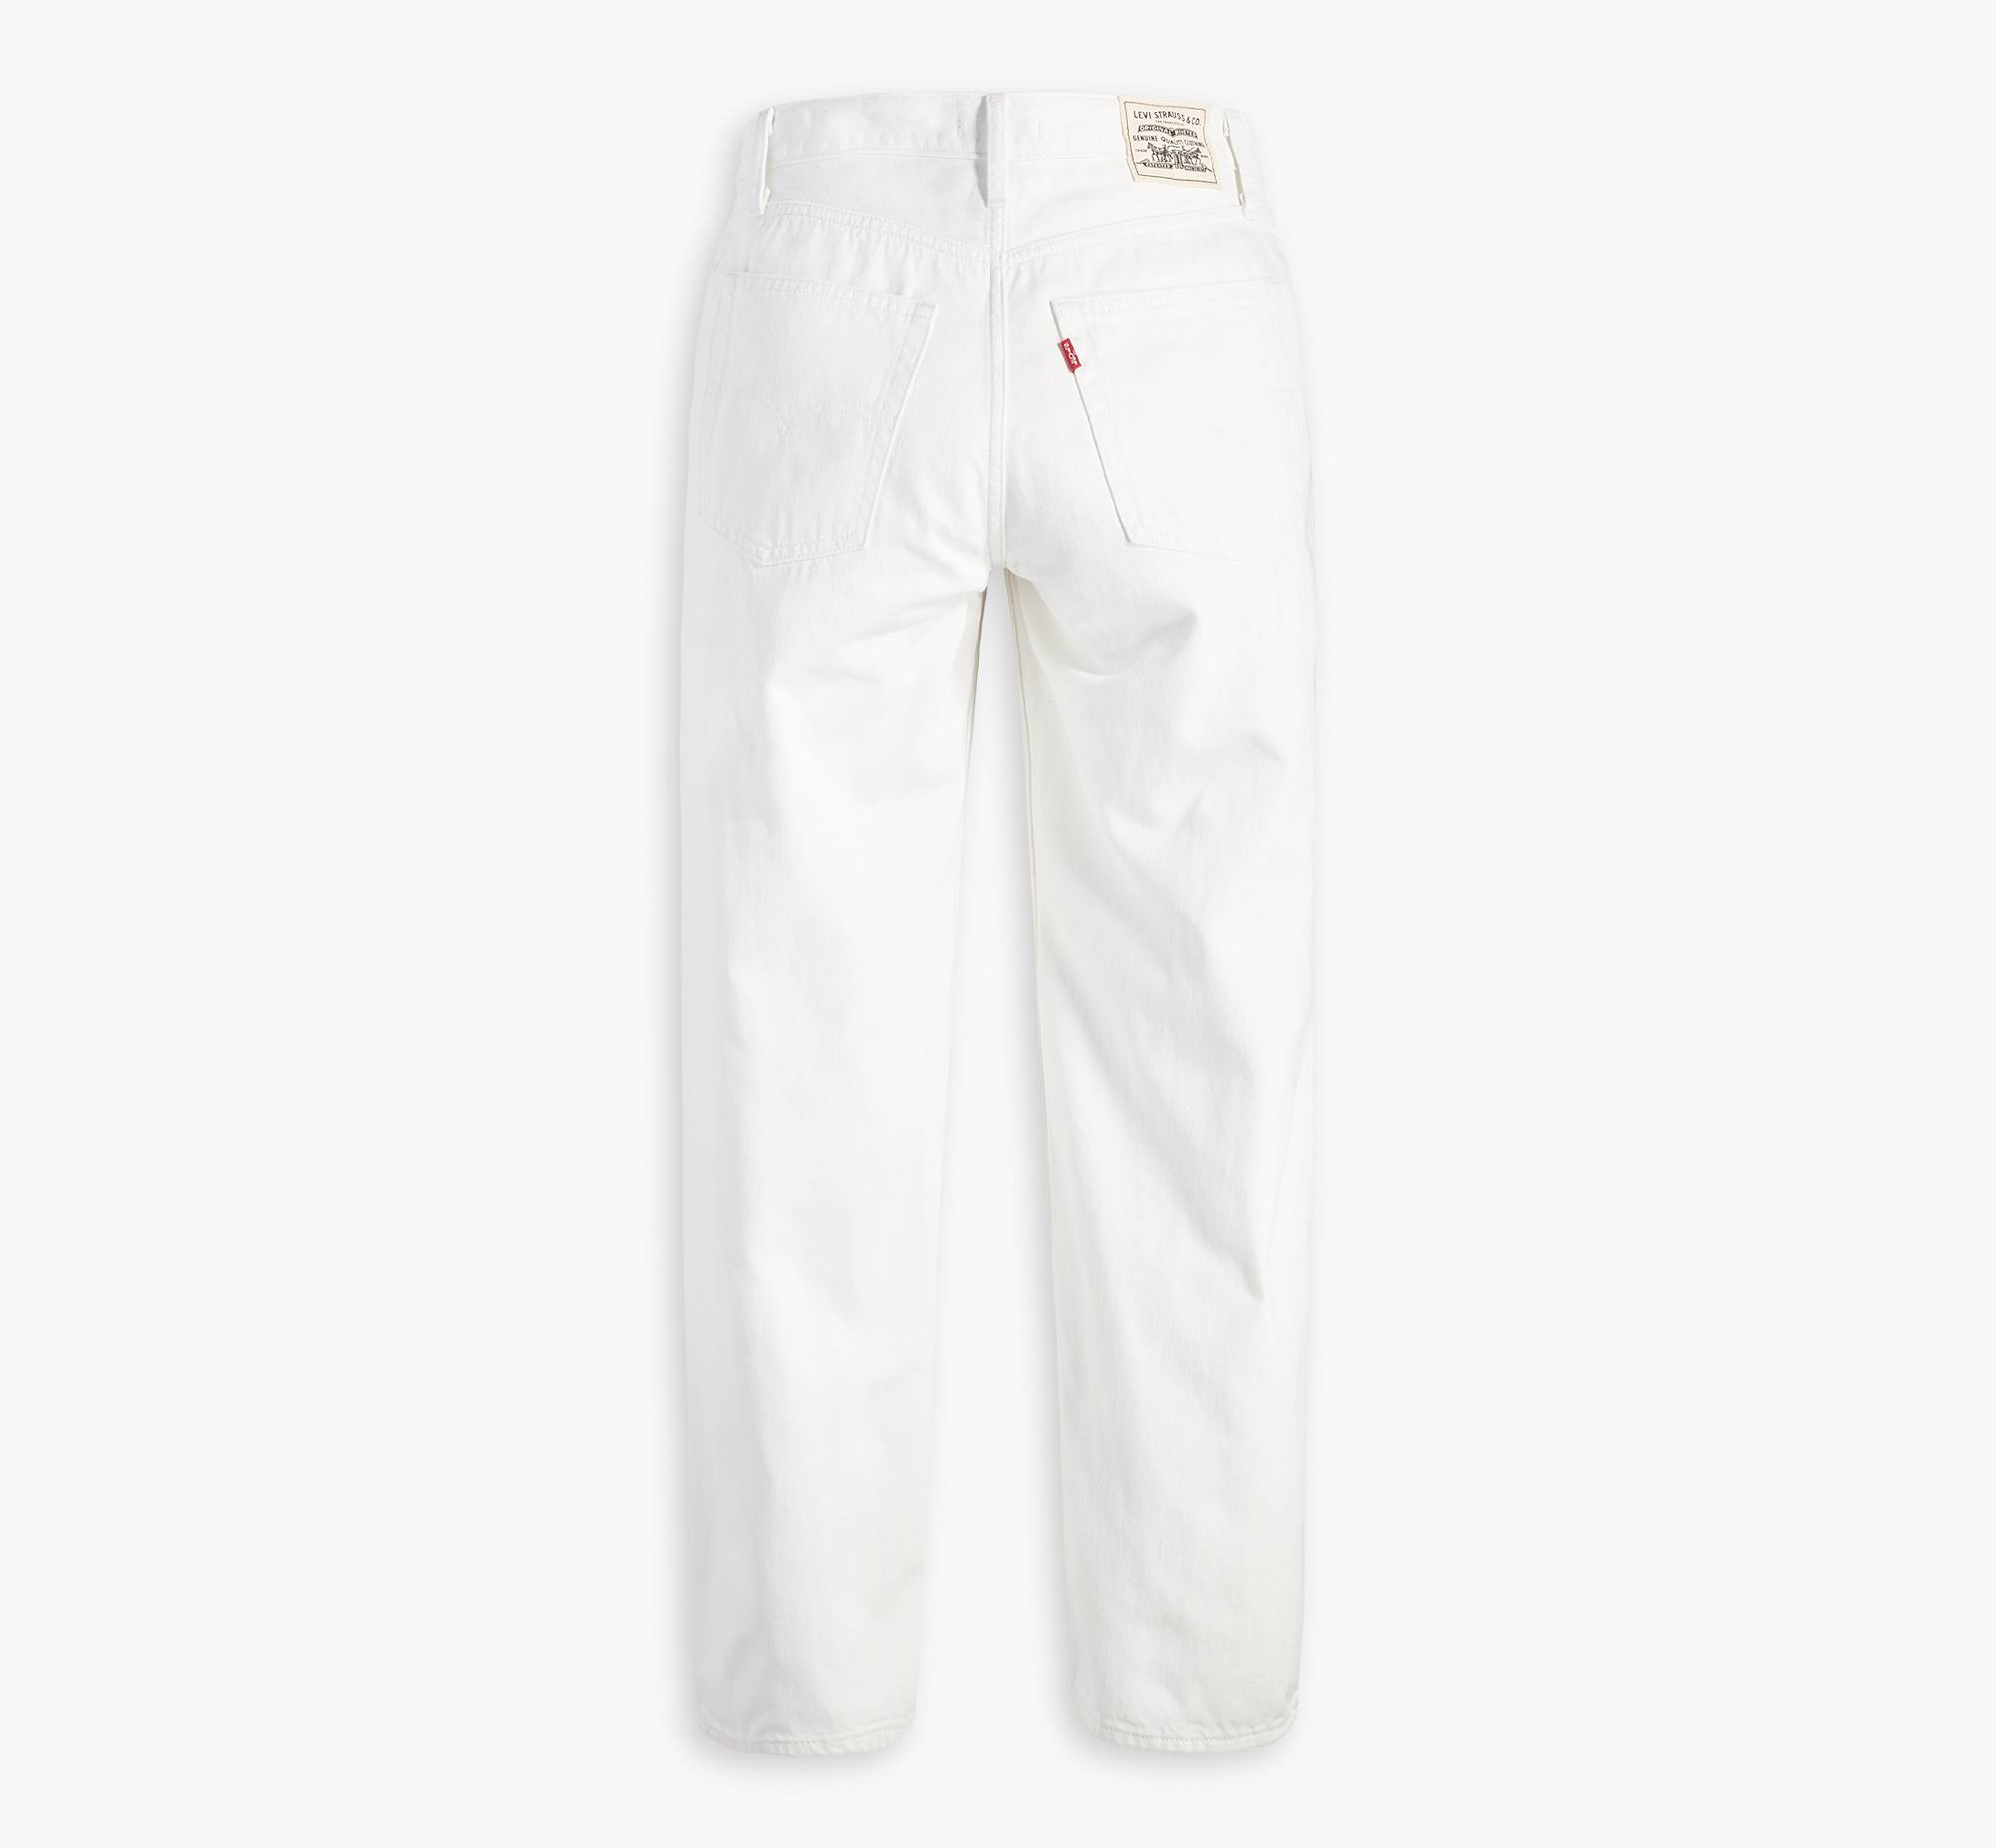 Wellthread® Baggy Dad Jeans - White | Levi's® GB